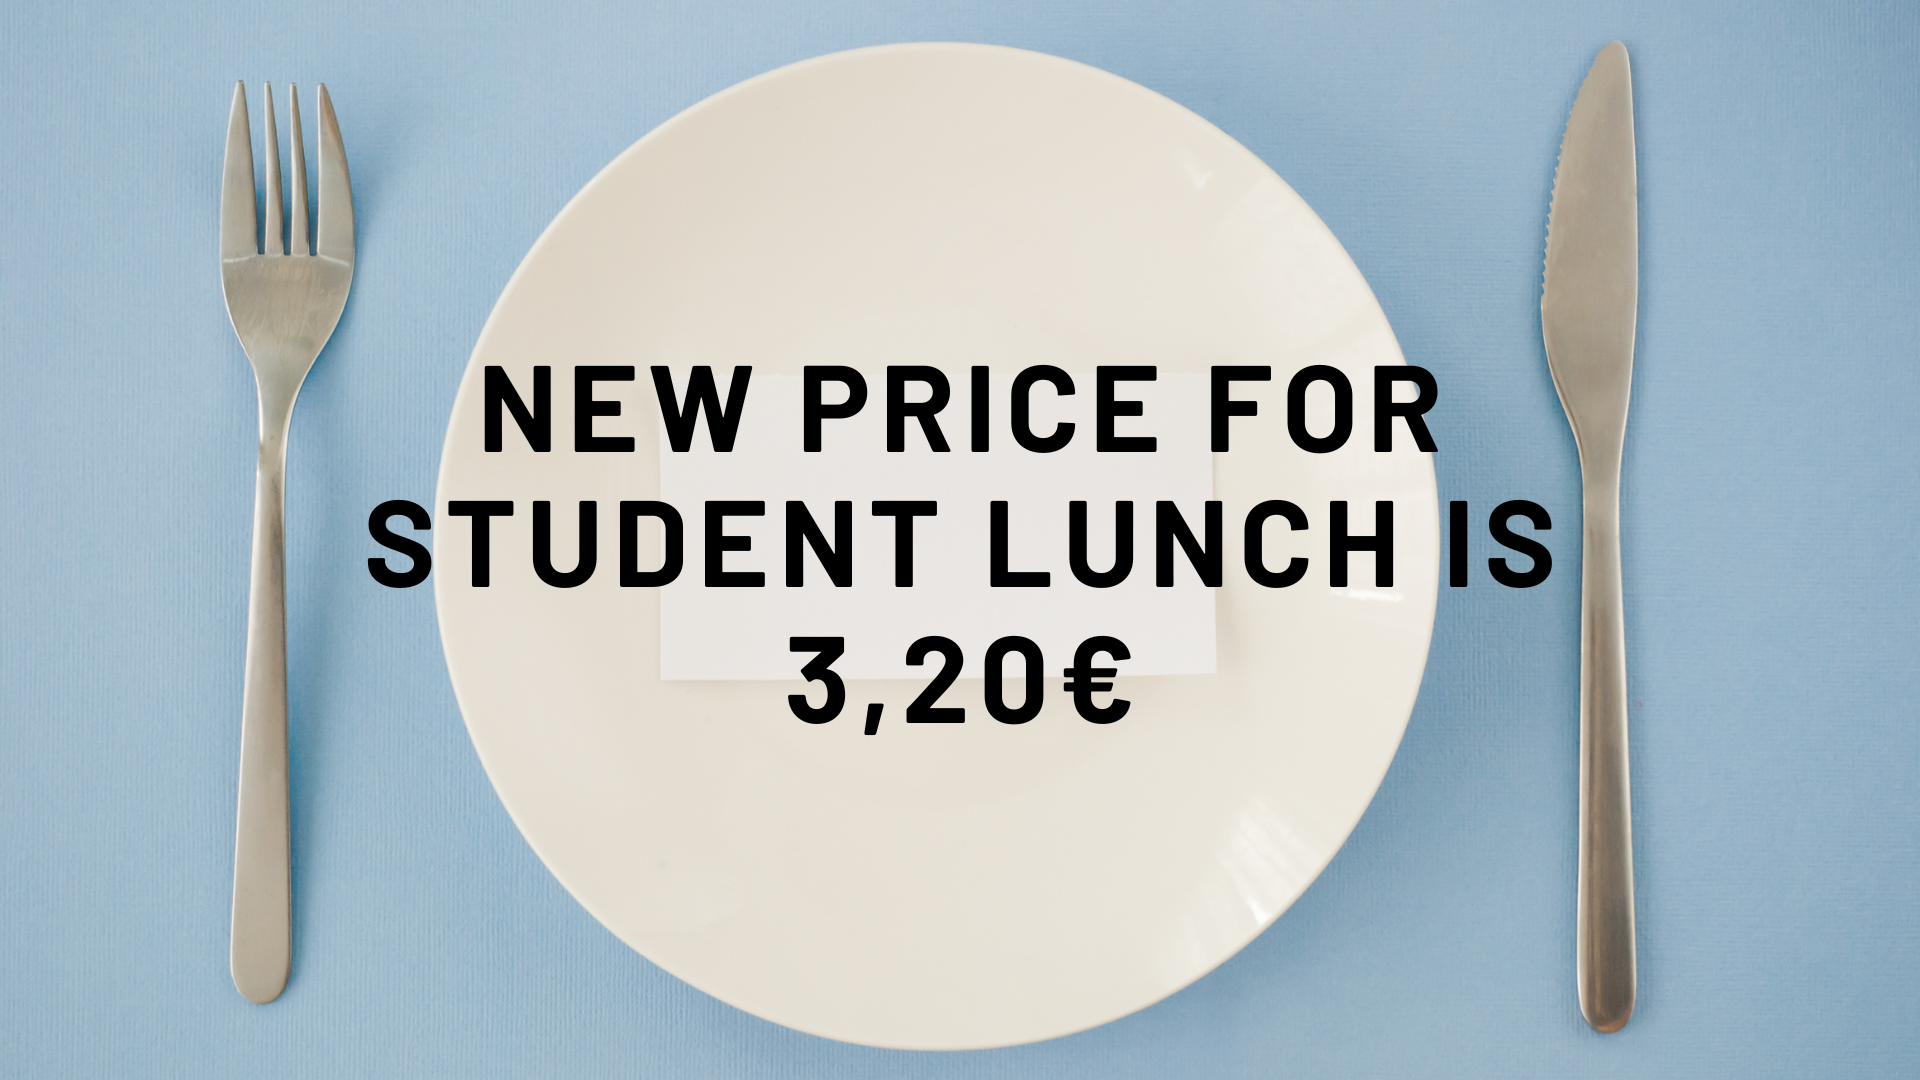 The new price for student lunch is 3,20€